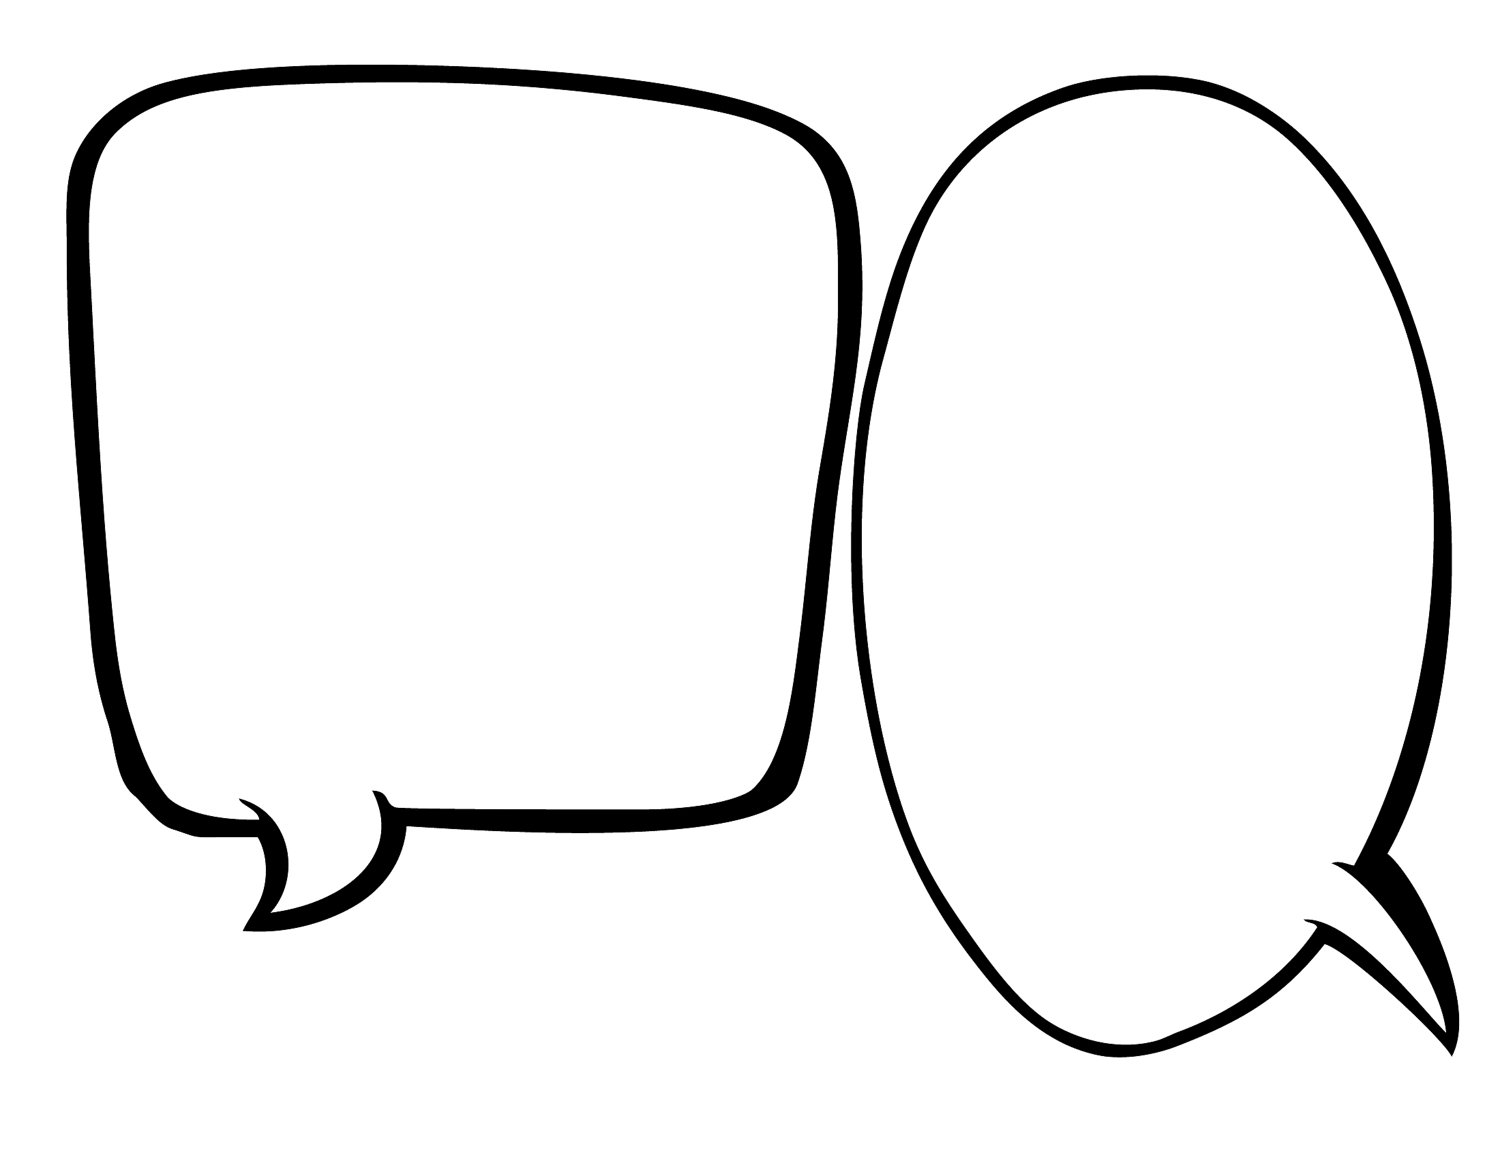 Instant Download Blank Speech Bubbles 1 2 Page By Bsquareddesign